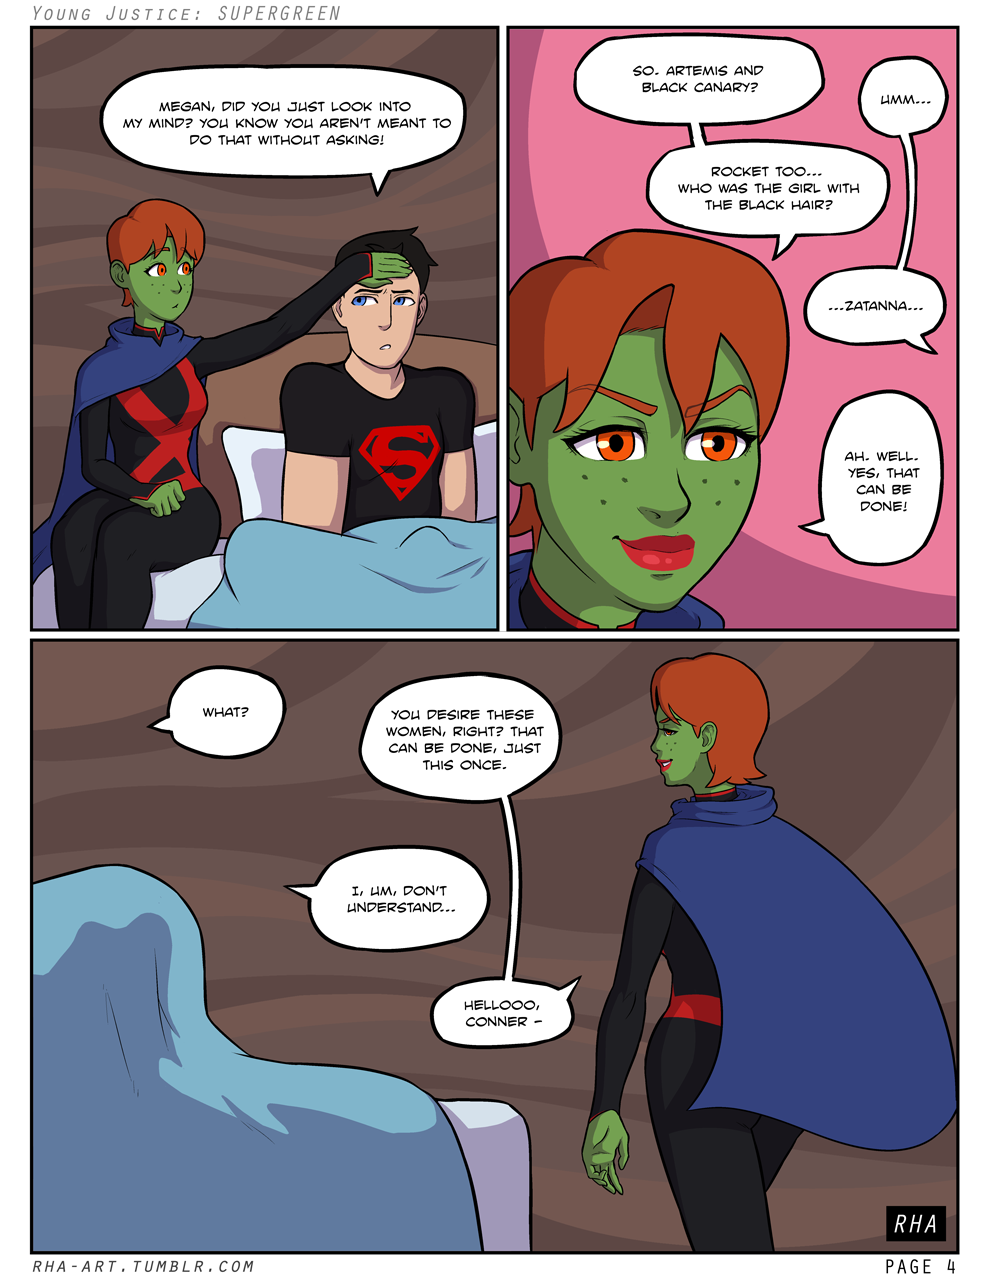 rha-art:  Young Justice: Supergreen — PAGES 00 – 07 Photoset overview:&gt;